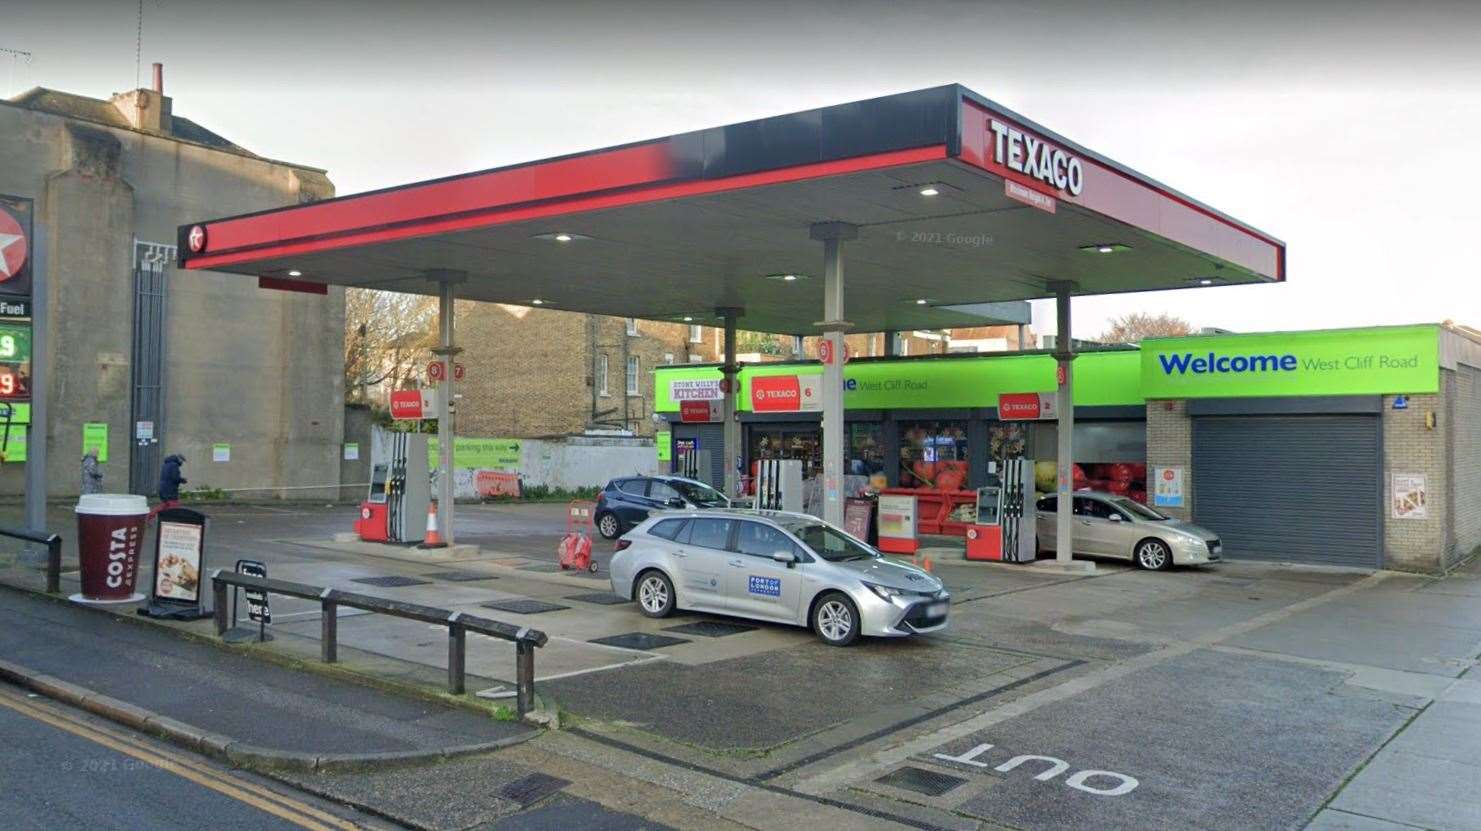 Items were stolen from the Texaco petrol station shop in Ramsgate. Picture: Google Street View